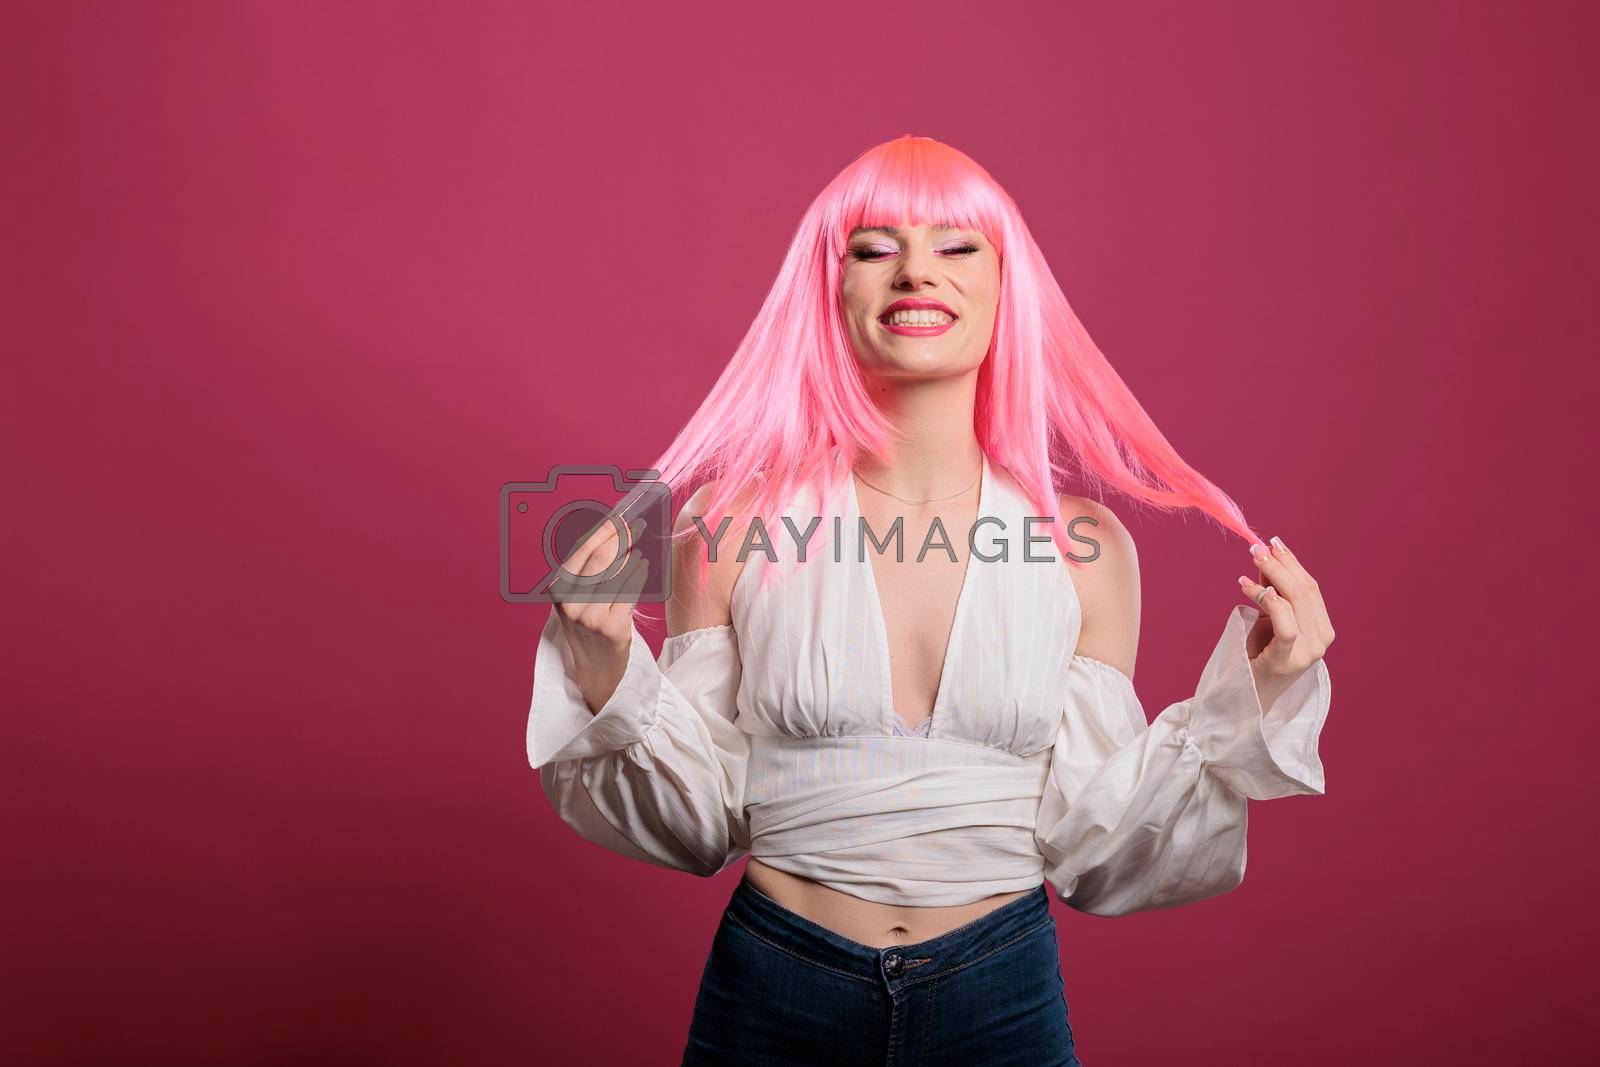 Royalty free image of Portrait of caucasian woman smiling in front of camera by DCStudio